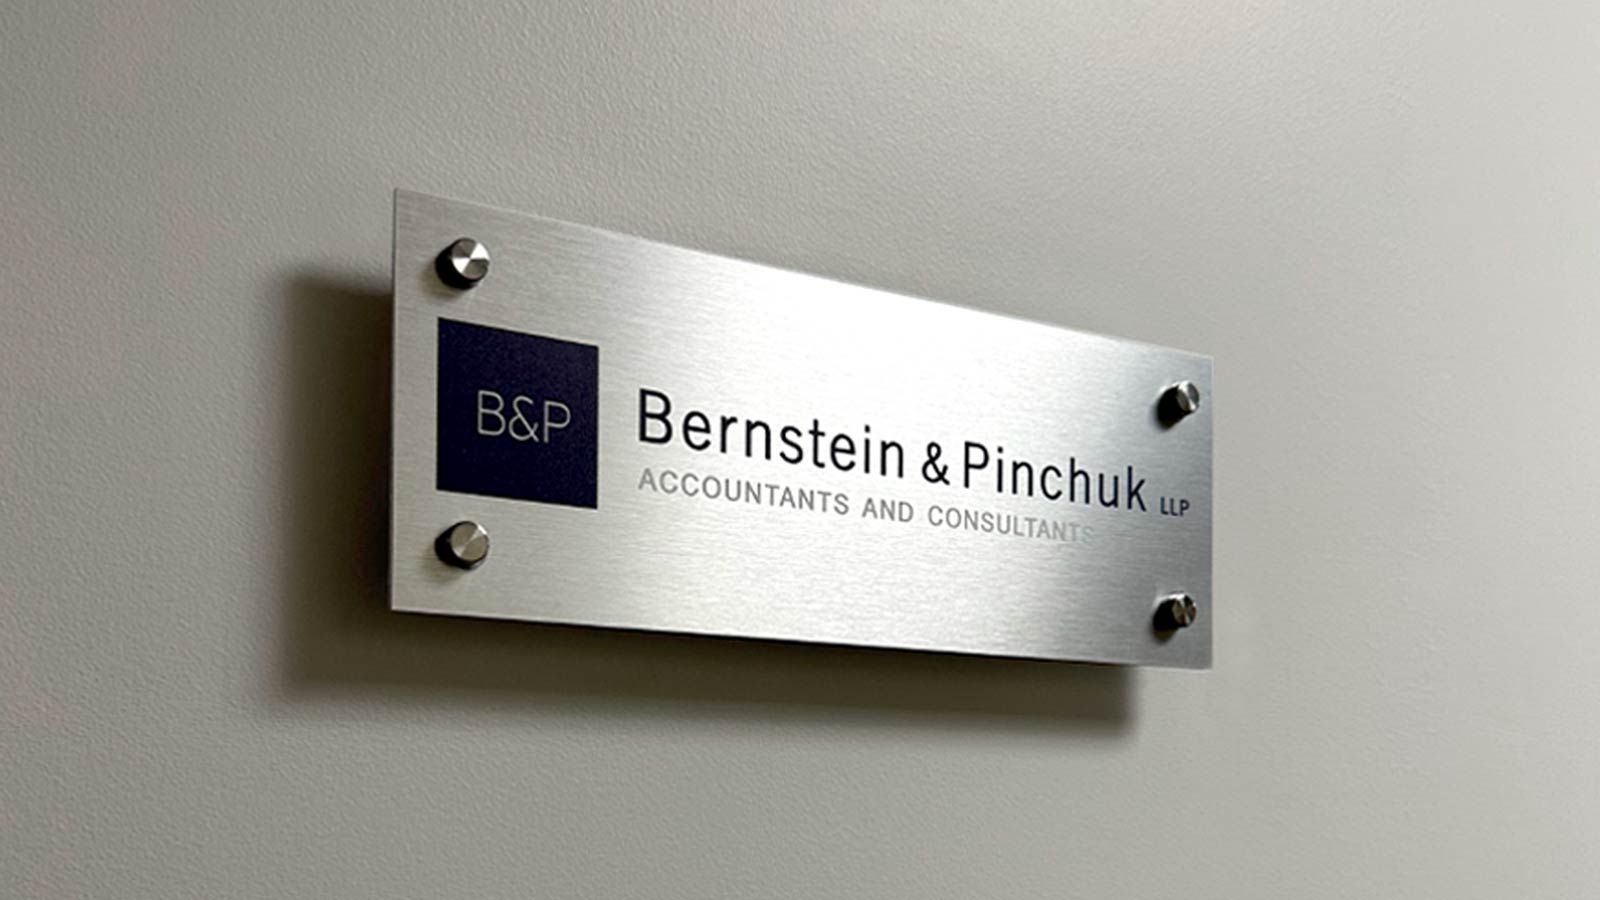 Bernstein and Pinchuk LLP aluminum sign attached to the wall